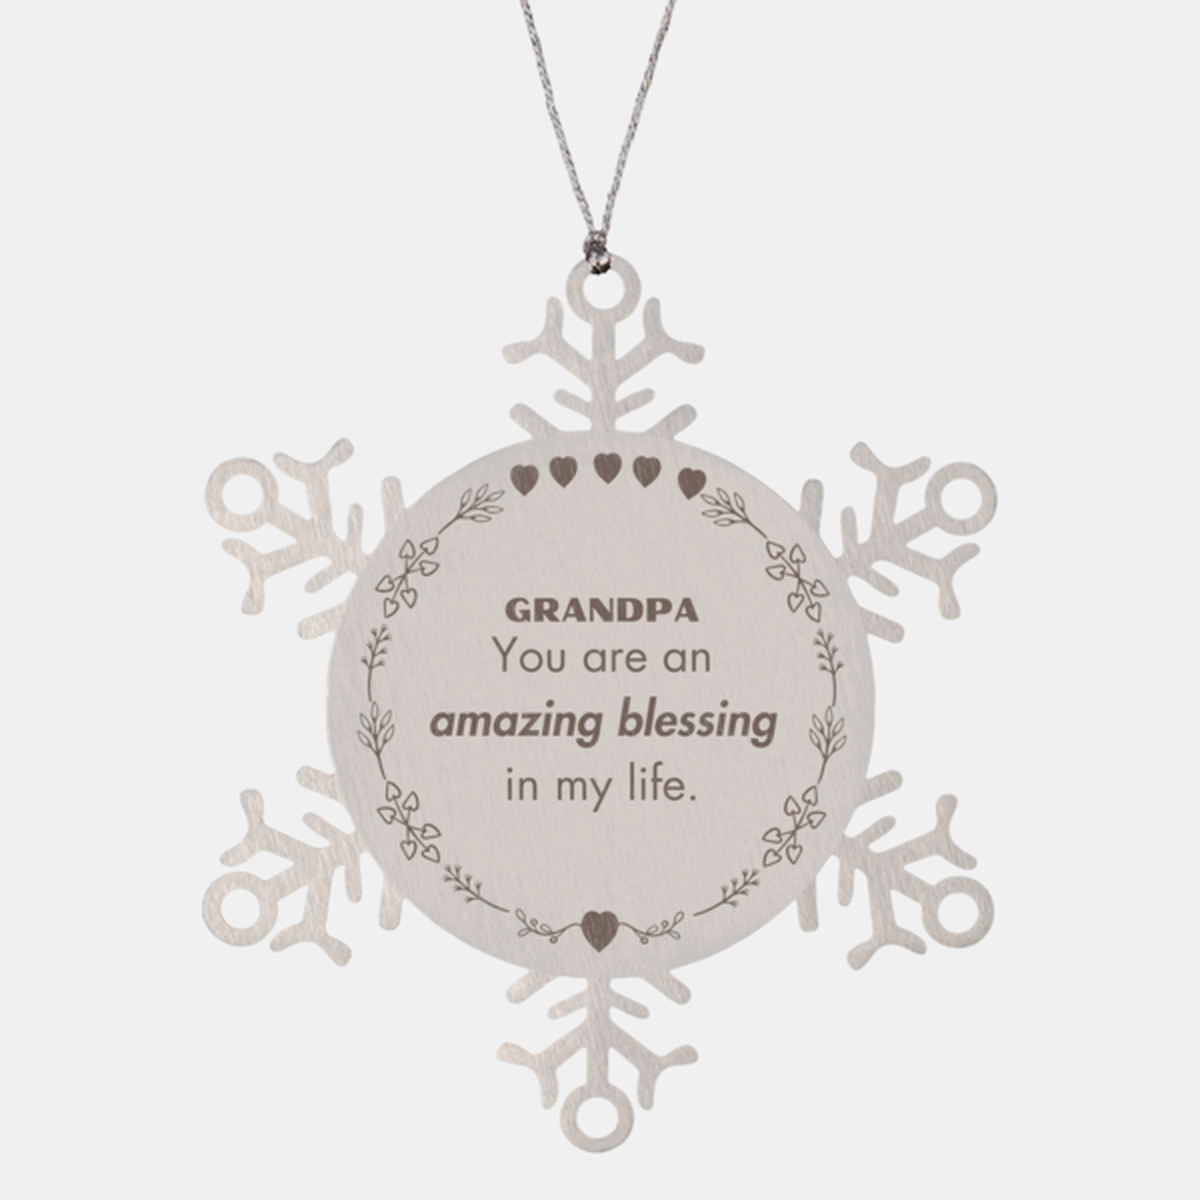 Grandpa Snowflake Ornament, You are an amazing blessing in my life, Thank You Gifts For Grandpa, Inspirational Birthday Christmas Unique Gifts For Grandpa